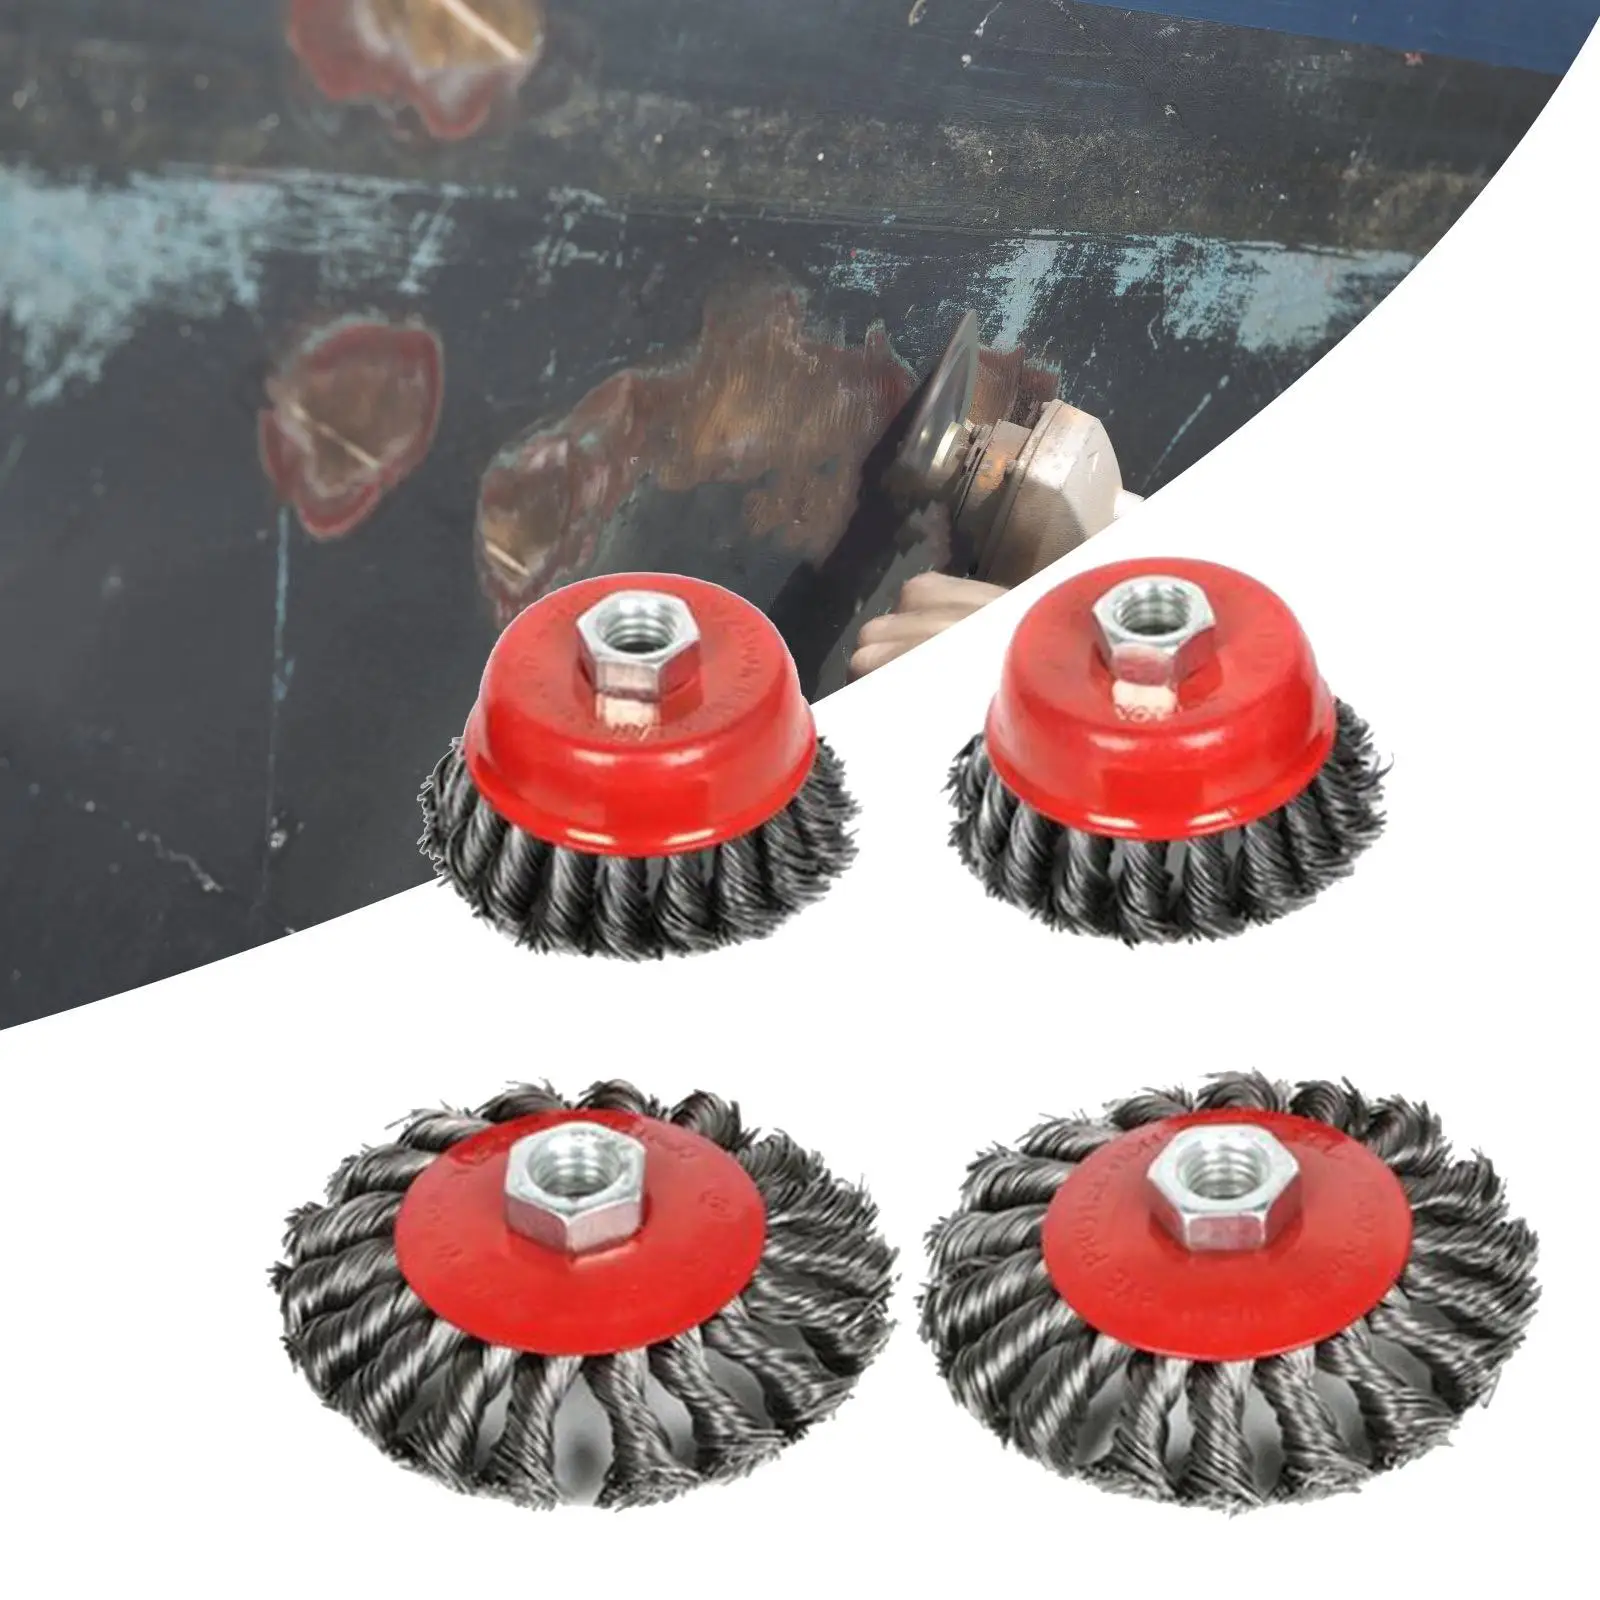 4x Wire Wheel Brush Twisted Knotted Cup Brush for Polishing Honing Deburring